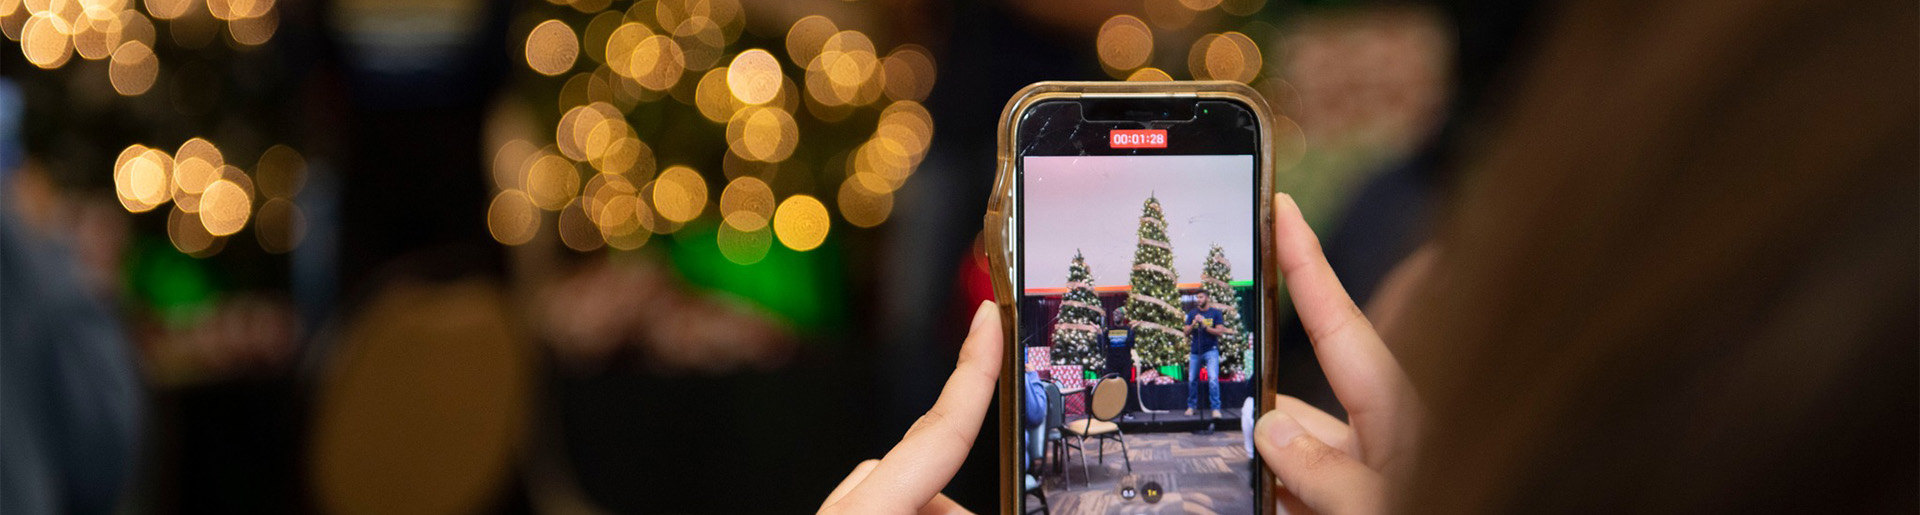 A cell phone displaying an image of 3 decorated Christmas trees.